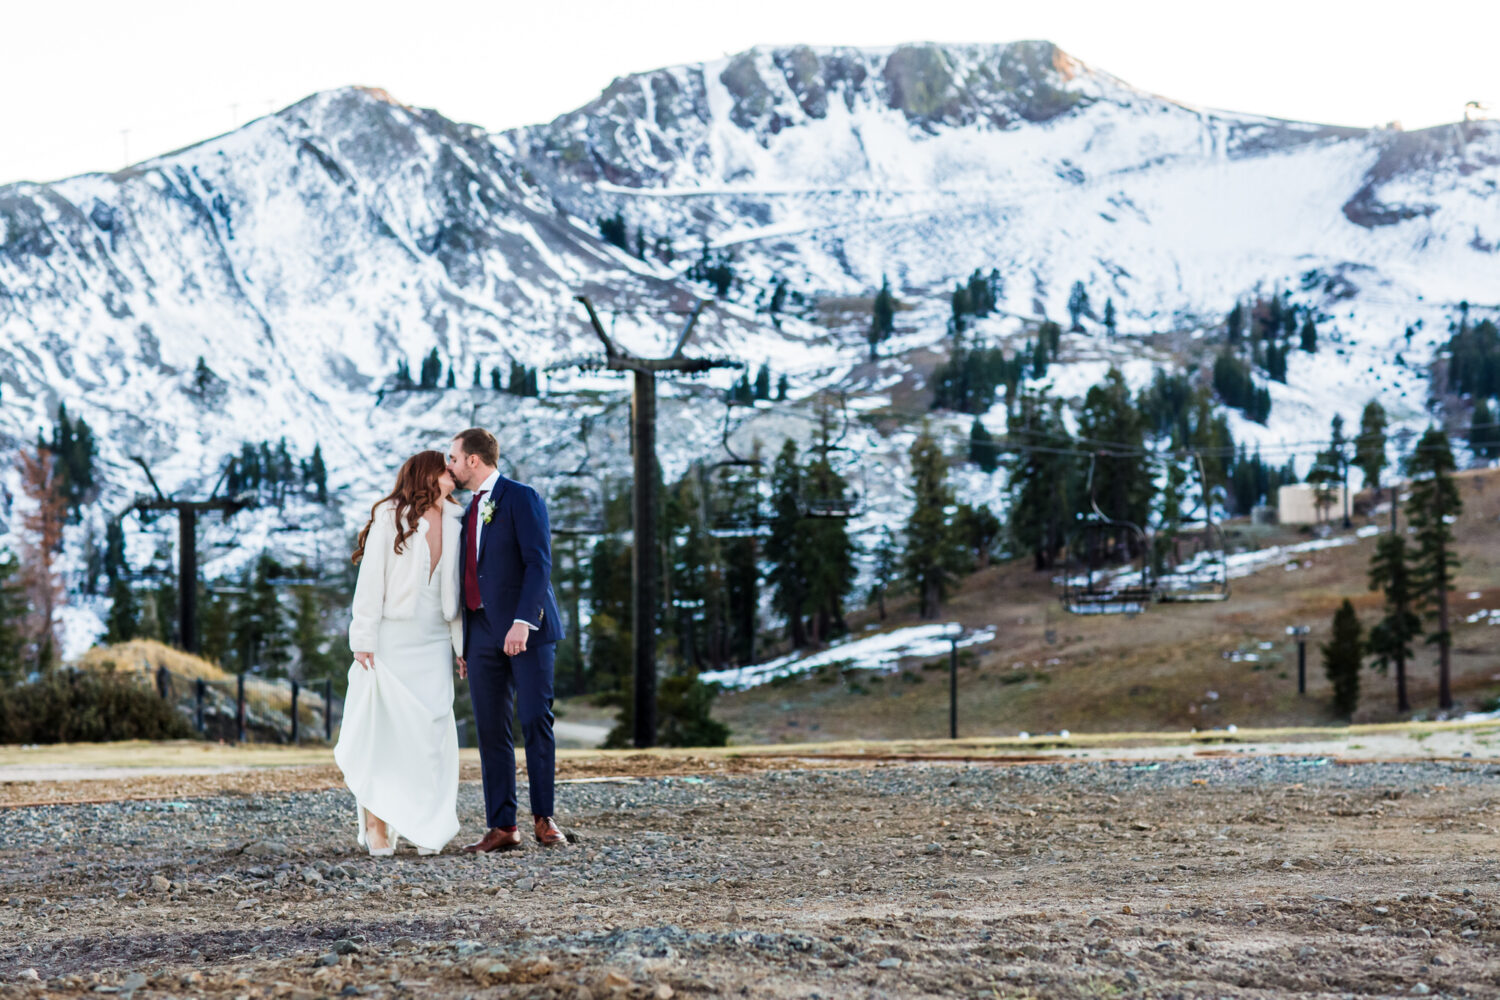 A romantic sunset walk for a bride and groom at Palisades Tahoe High Camp, with snowy mountains in the background.